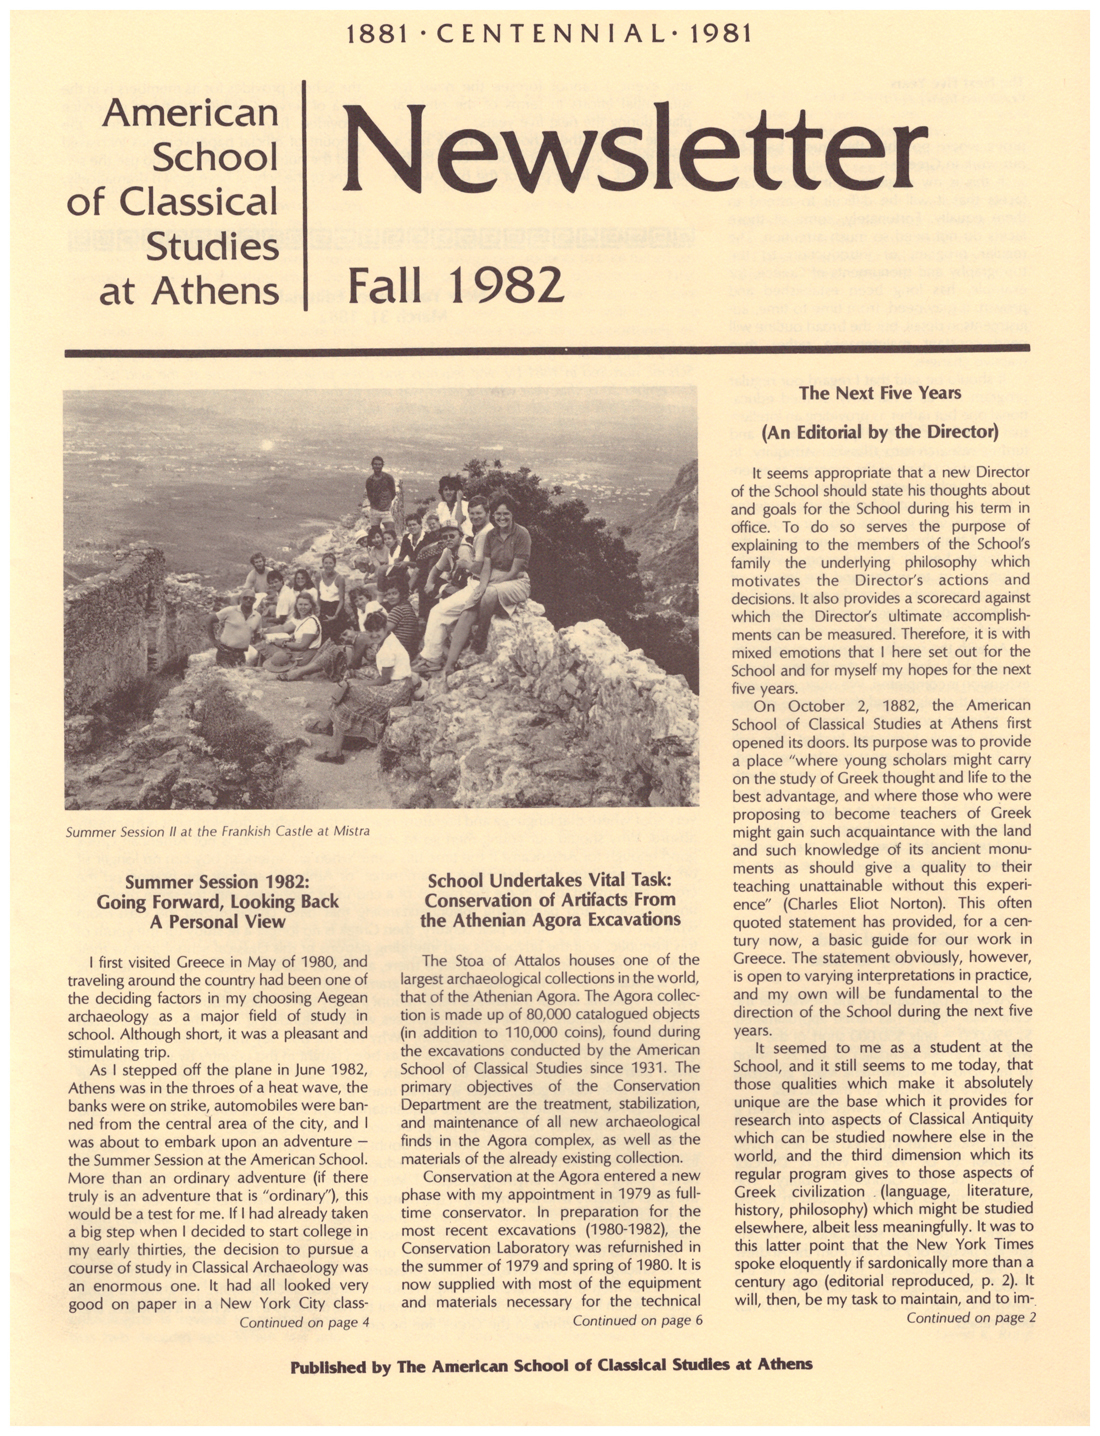 A Blast from the Past: Uploading old ASCSA Newsletters